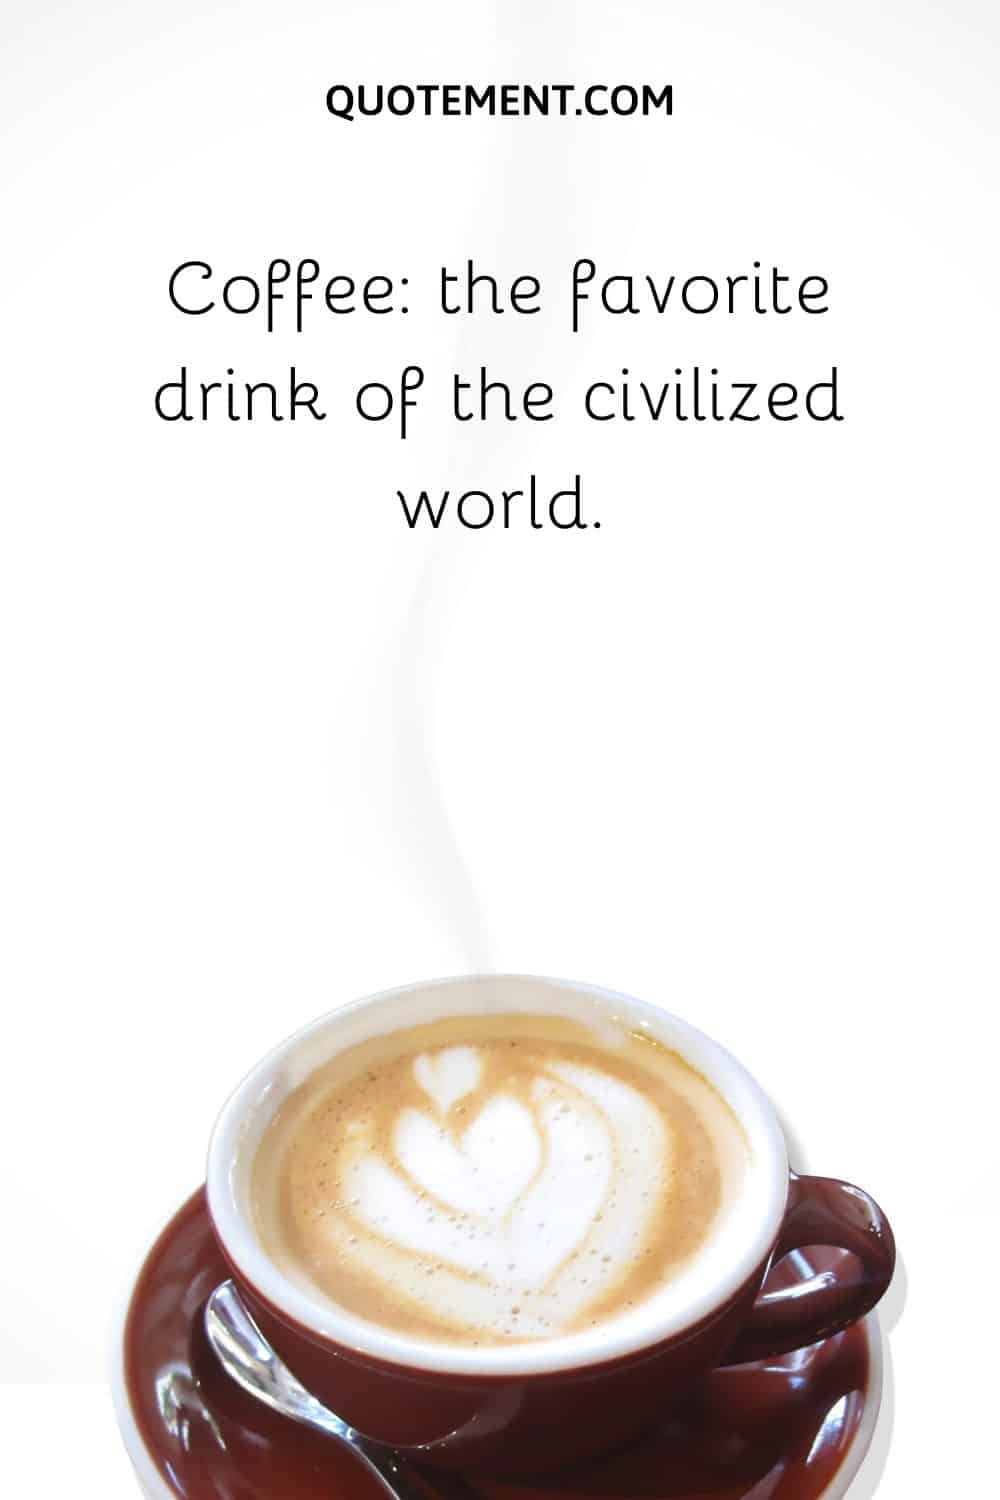 Coffee the favorite drink of the civilized world